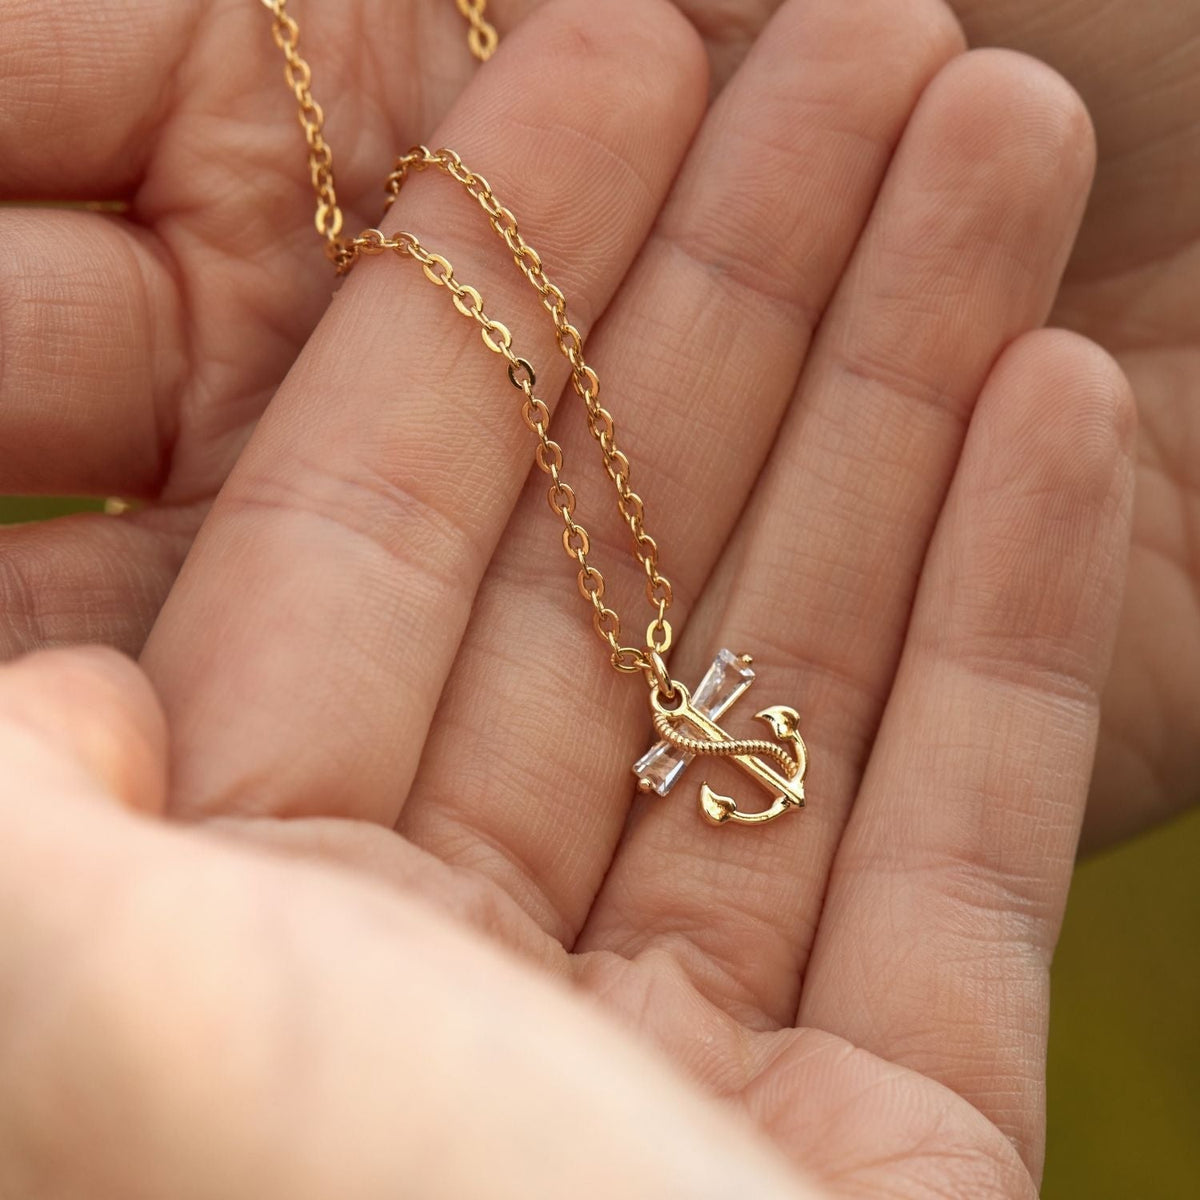 To My Beautiful Wife | Strongest, Bravest, Most Caring | Anchor Necklace